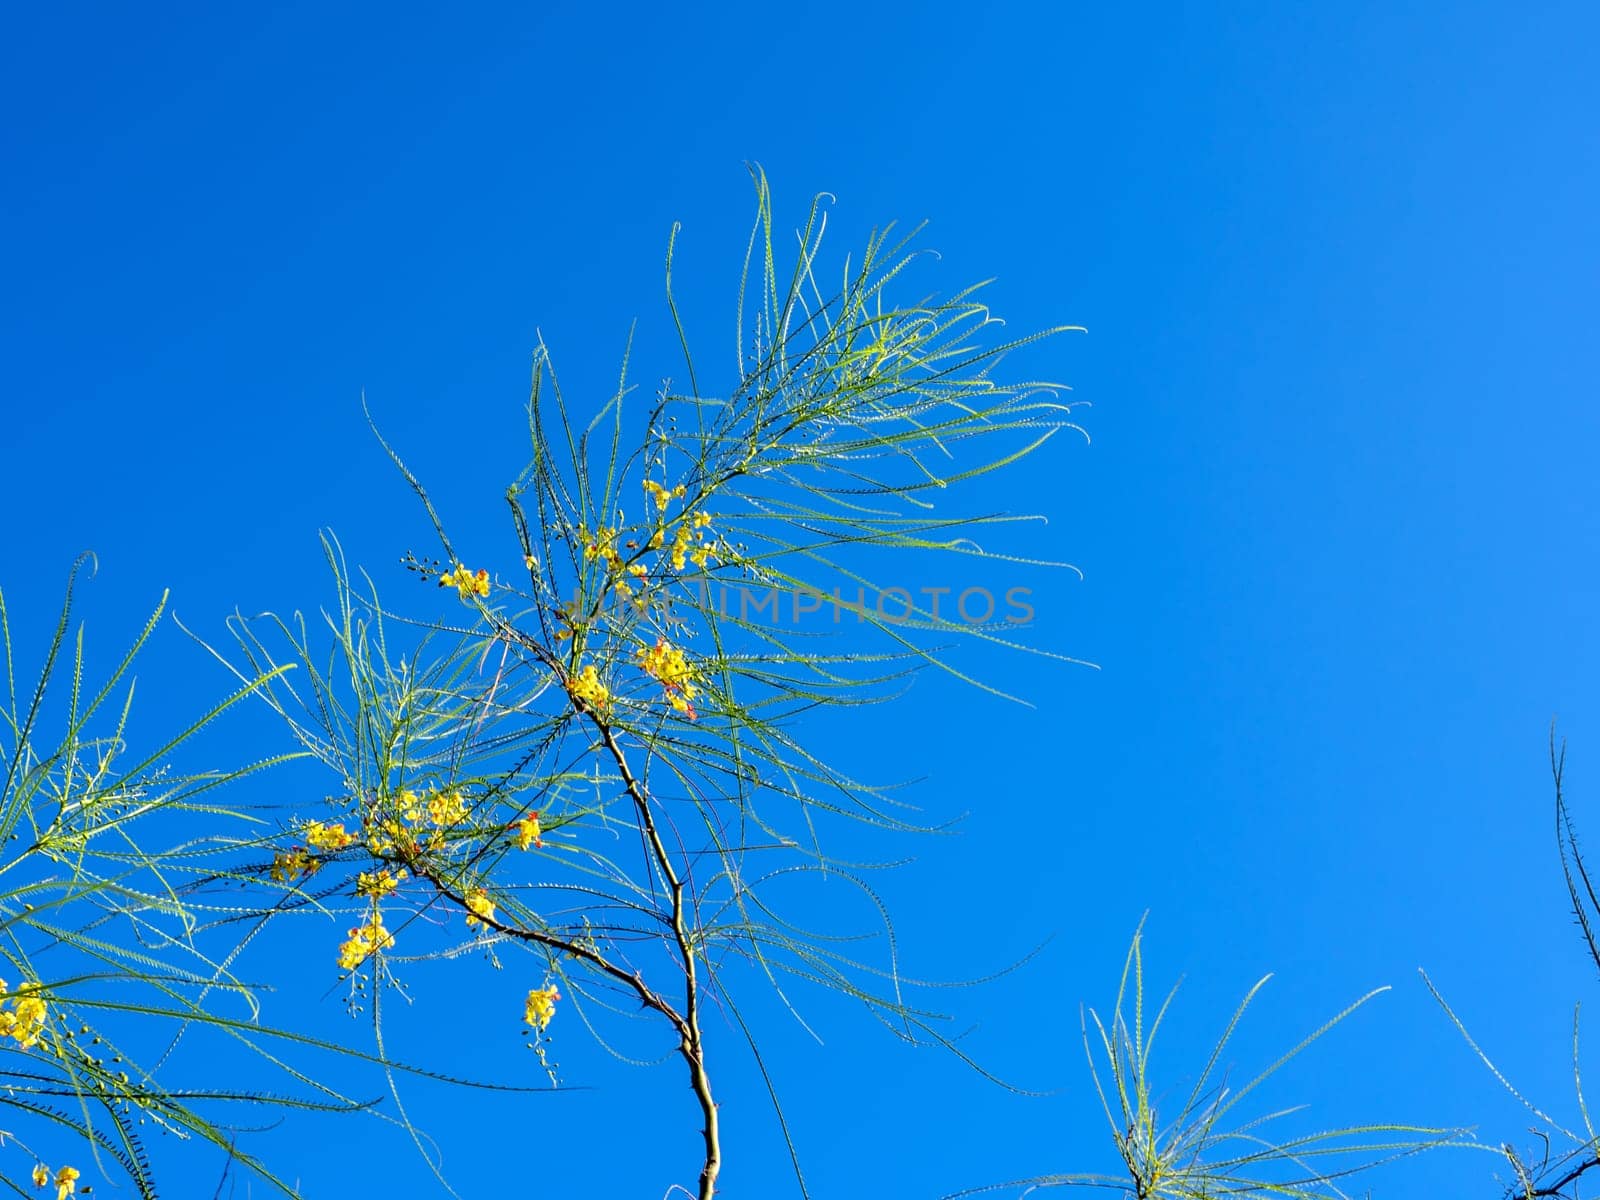 Yellow flowers and needle shaped leaves of Parkinsonia aculeata